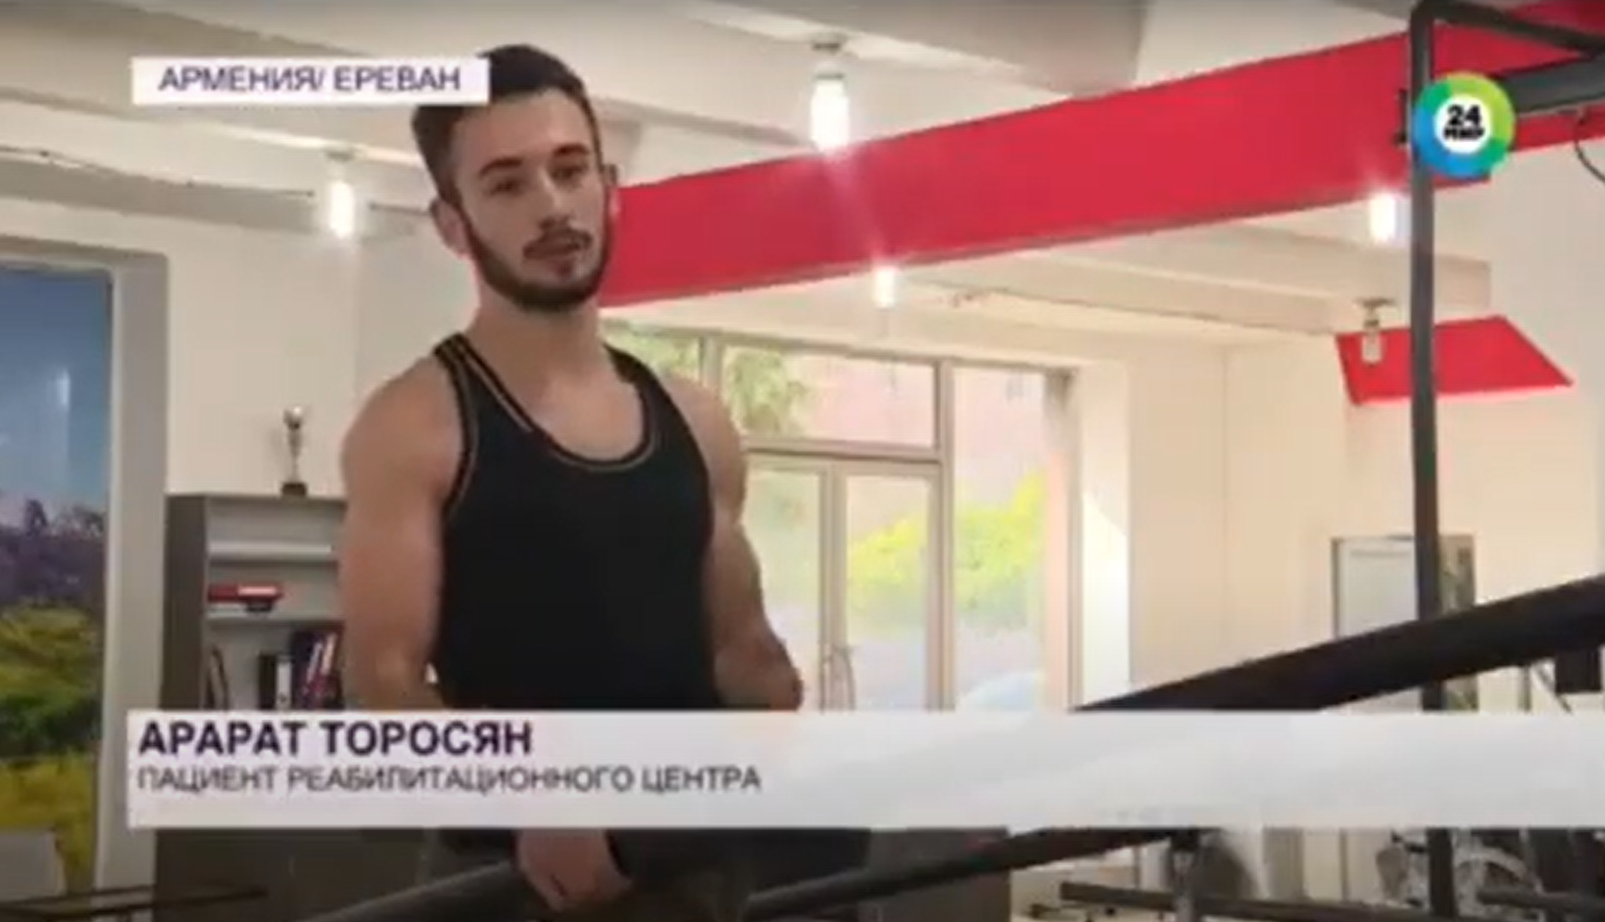 Russian TV channel "Mir" about QaylTech: "Standing On Your Feet"